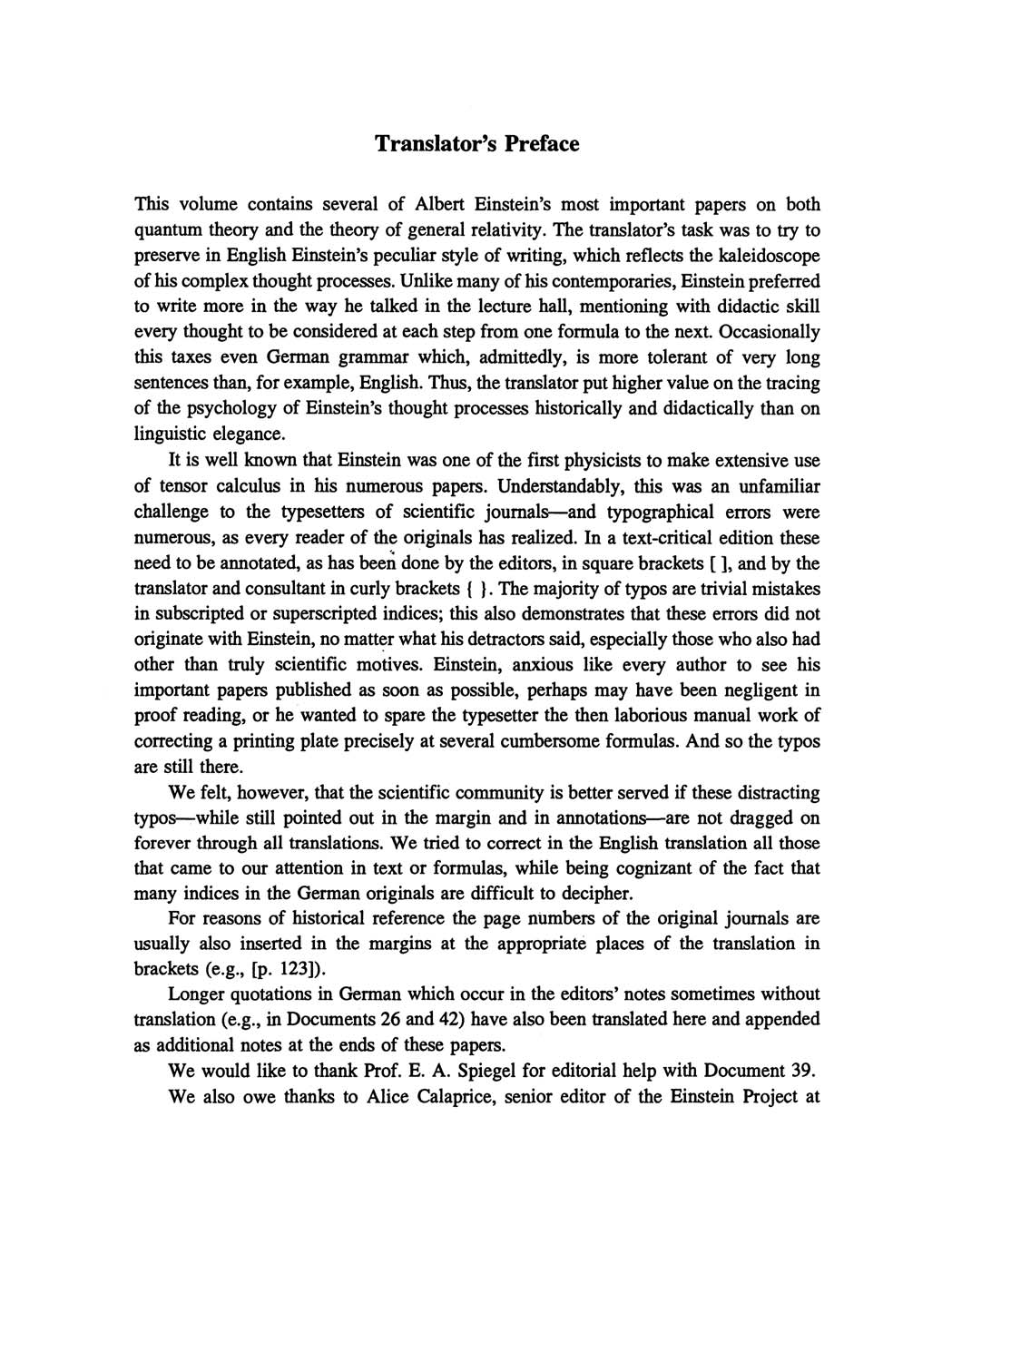 Volume 6: The Berlin Years: Writings, 1914-1917 (English translation supplement) page xi